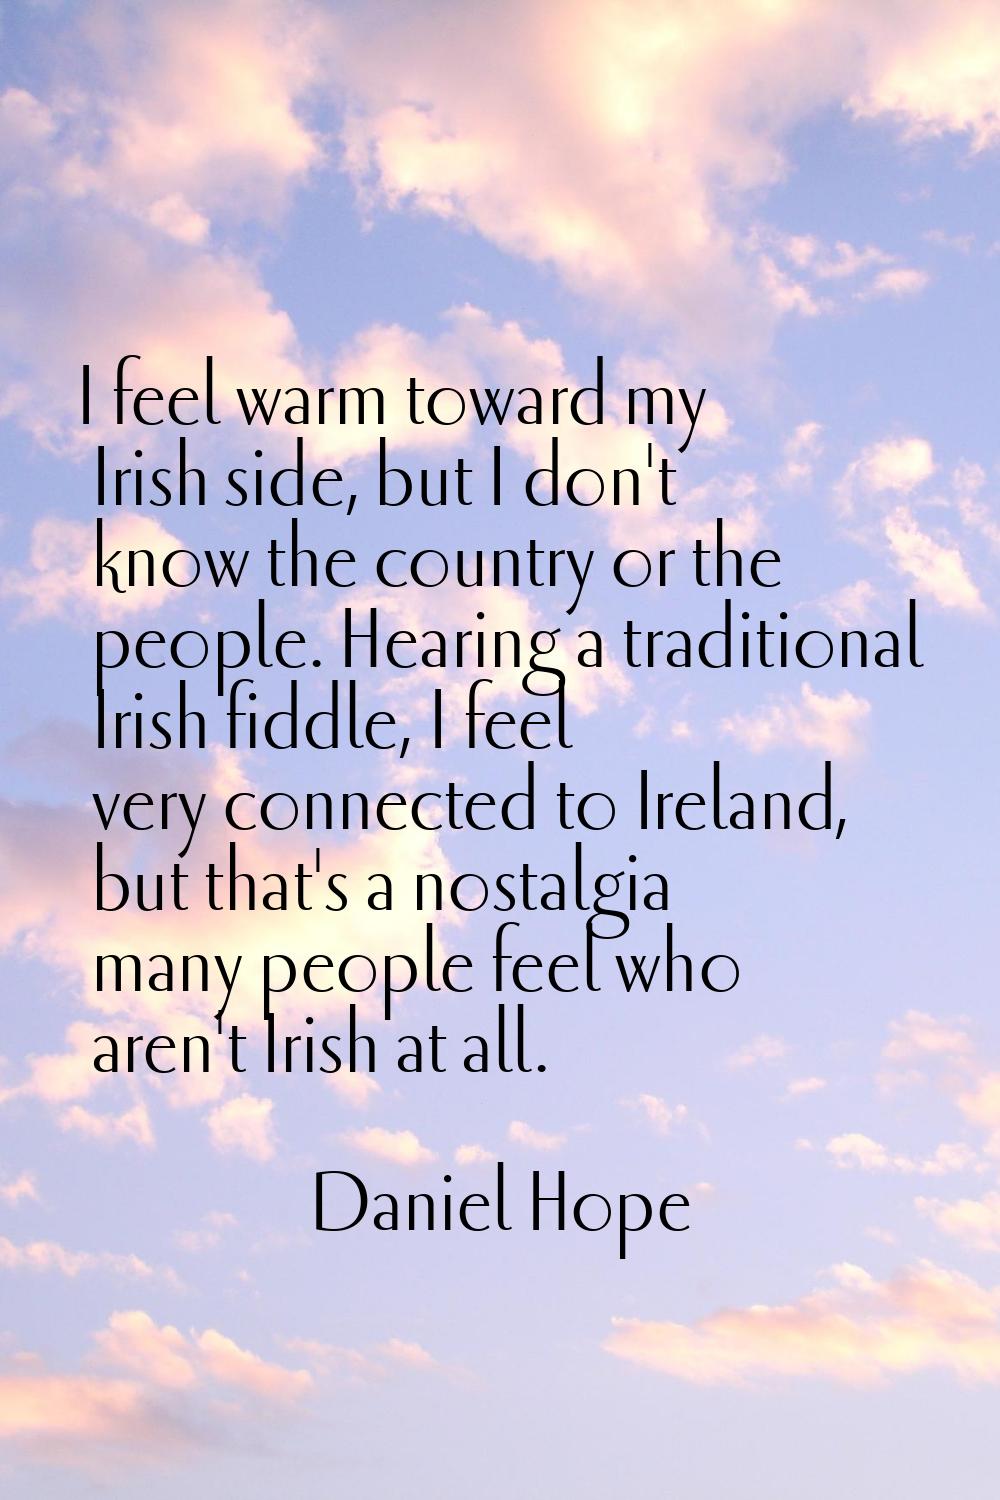 I feel warm toward my Irish side, but I don't know the country or the people. Hearing a traditional